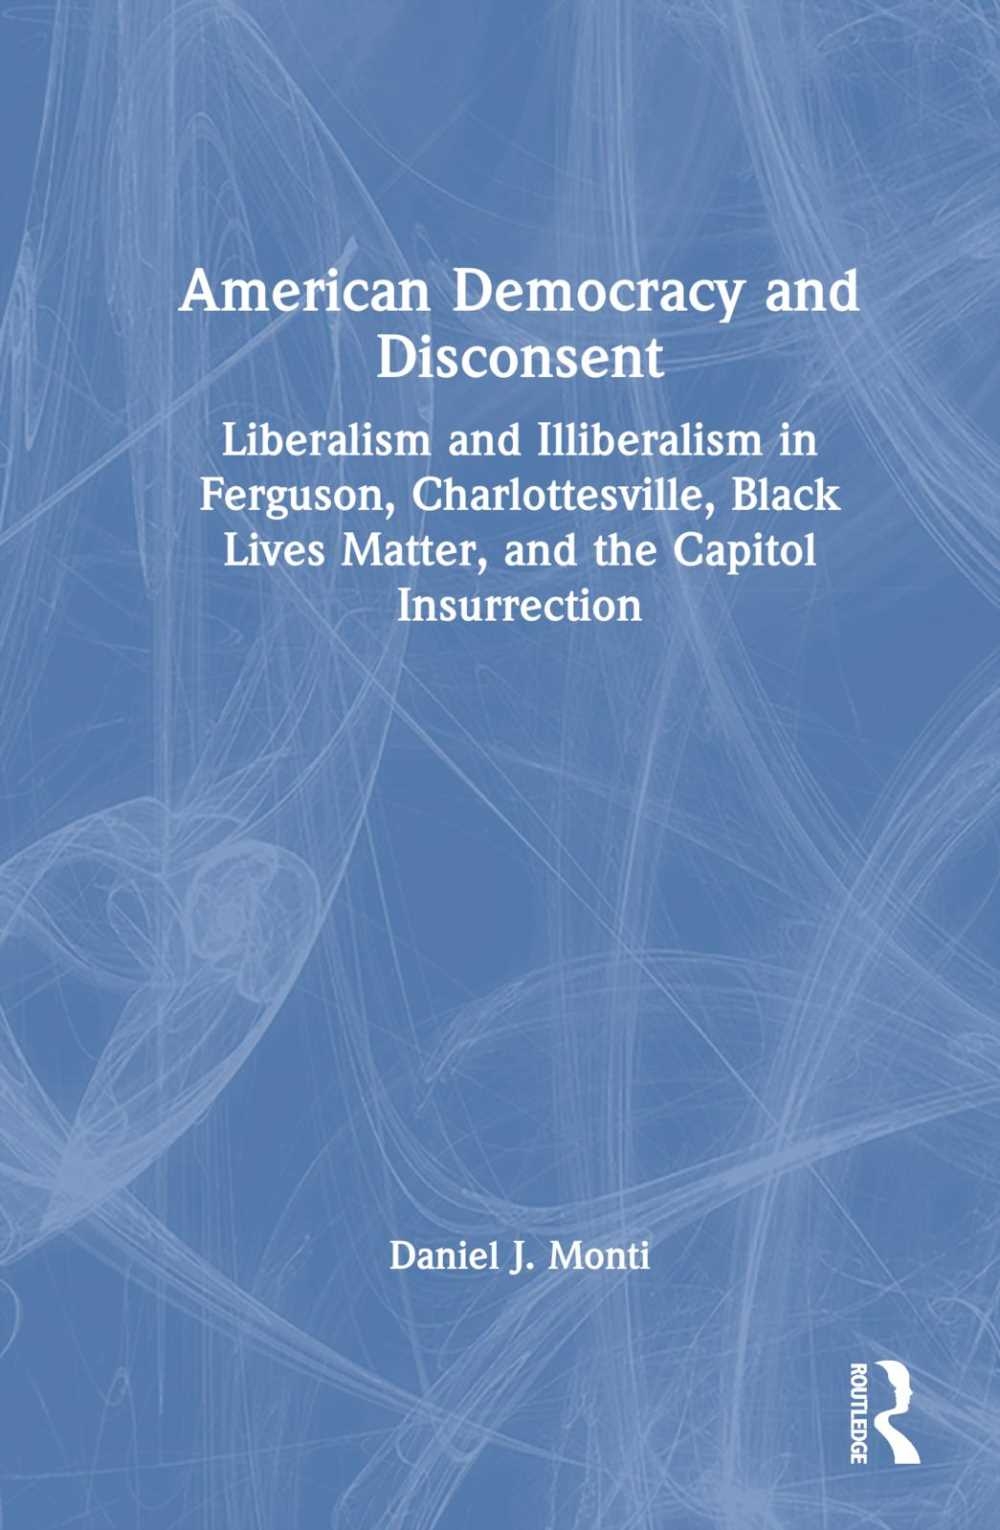 American Democracy and Disconsent: Liberalism, Illiberalism, and Civil Unrest in Ferguson, Charlottesville, Black Lives Matter, and the Capitol Insurr